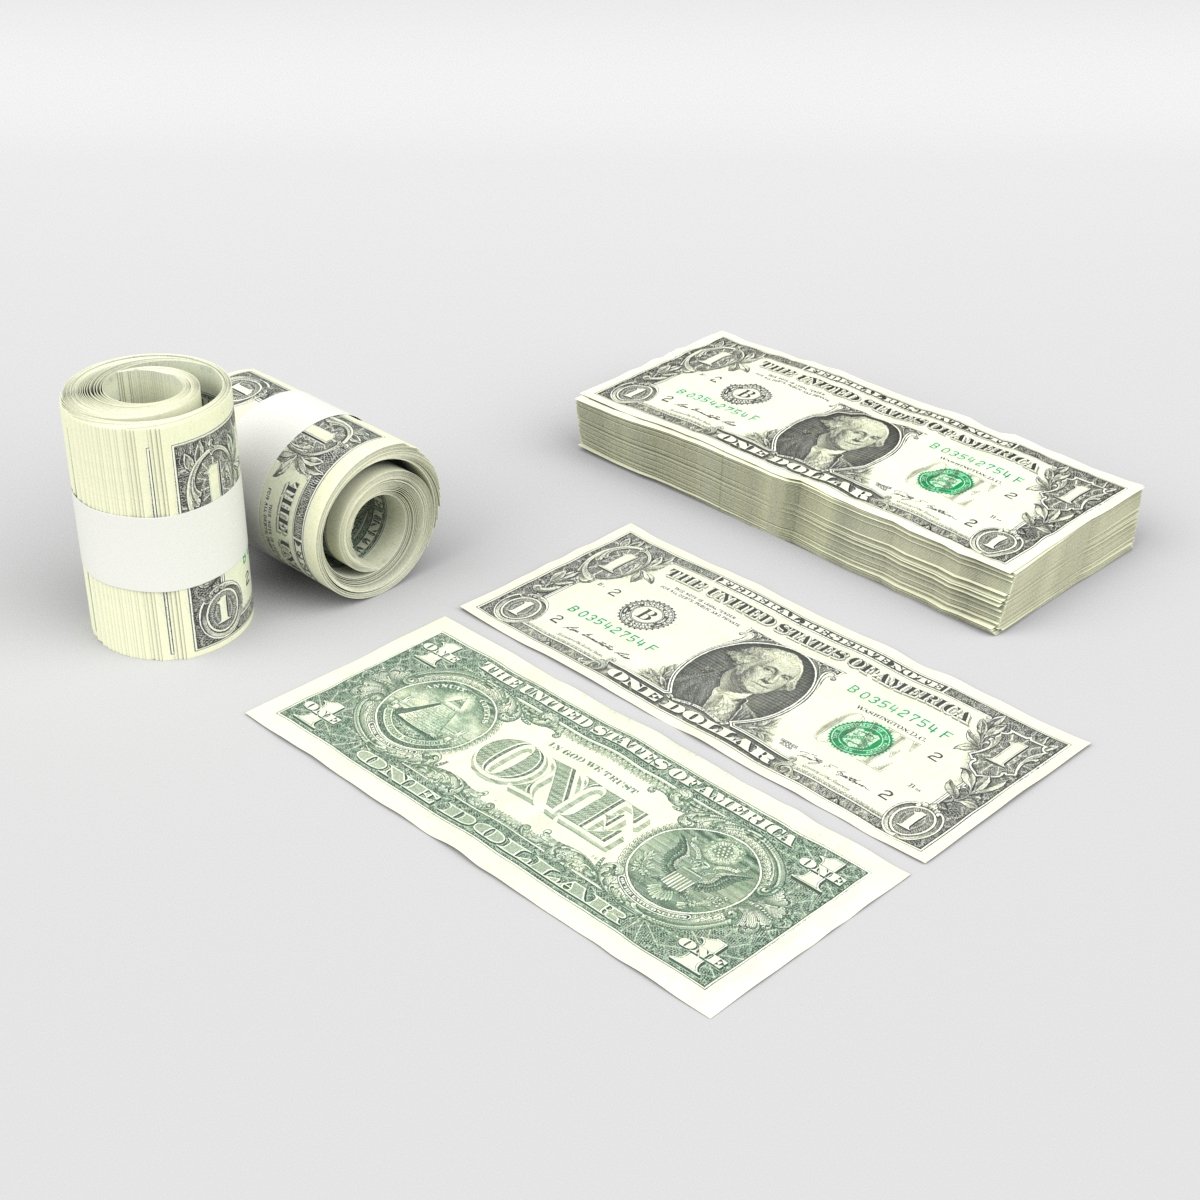 49 1 Usd Inr Images, Stock Photos, 3D objects, & Vectors